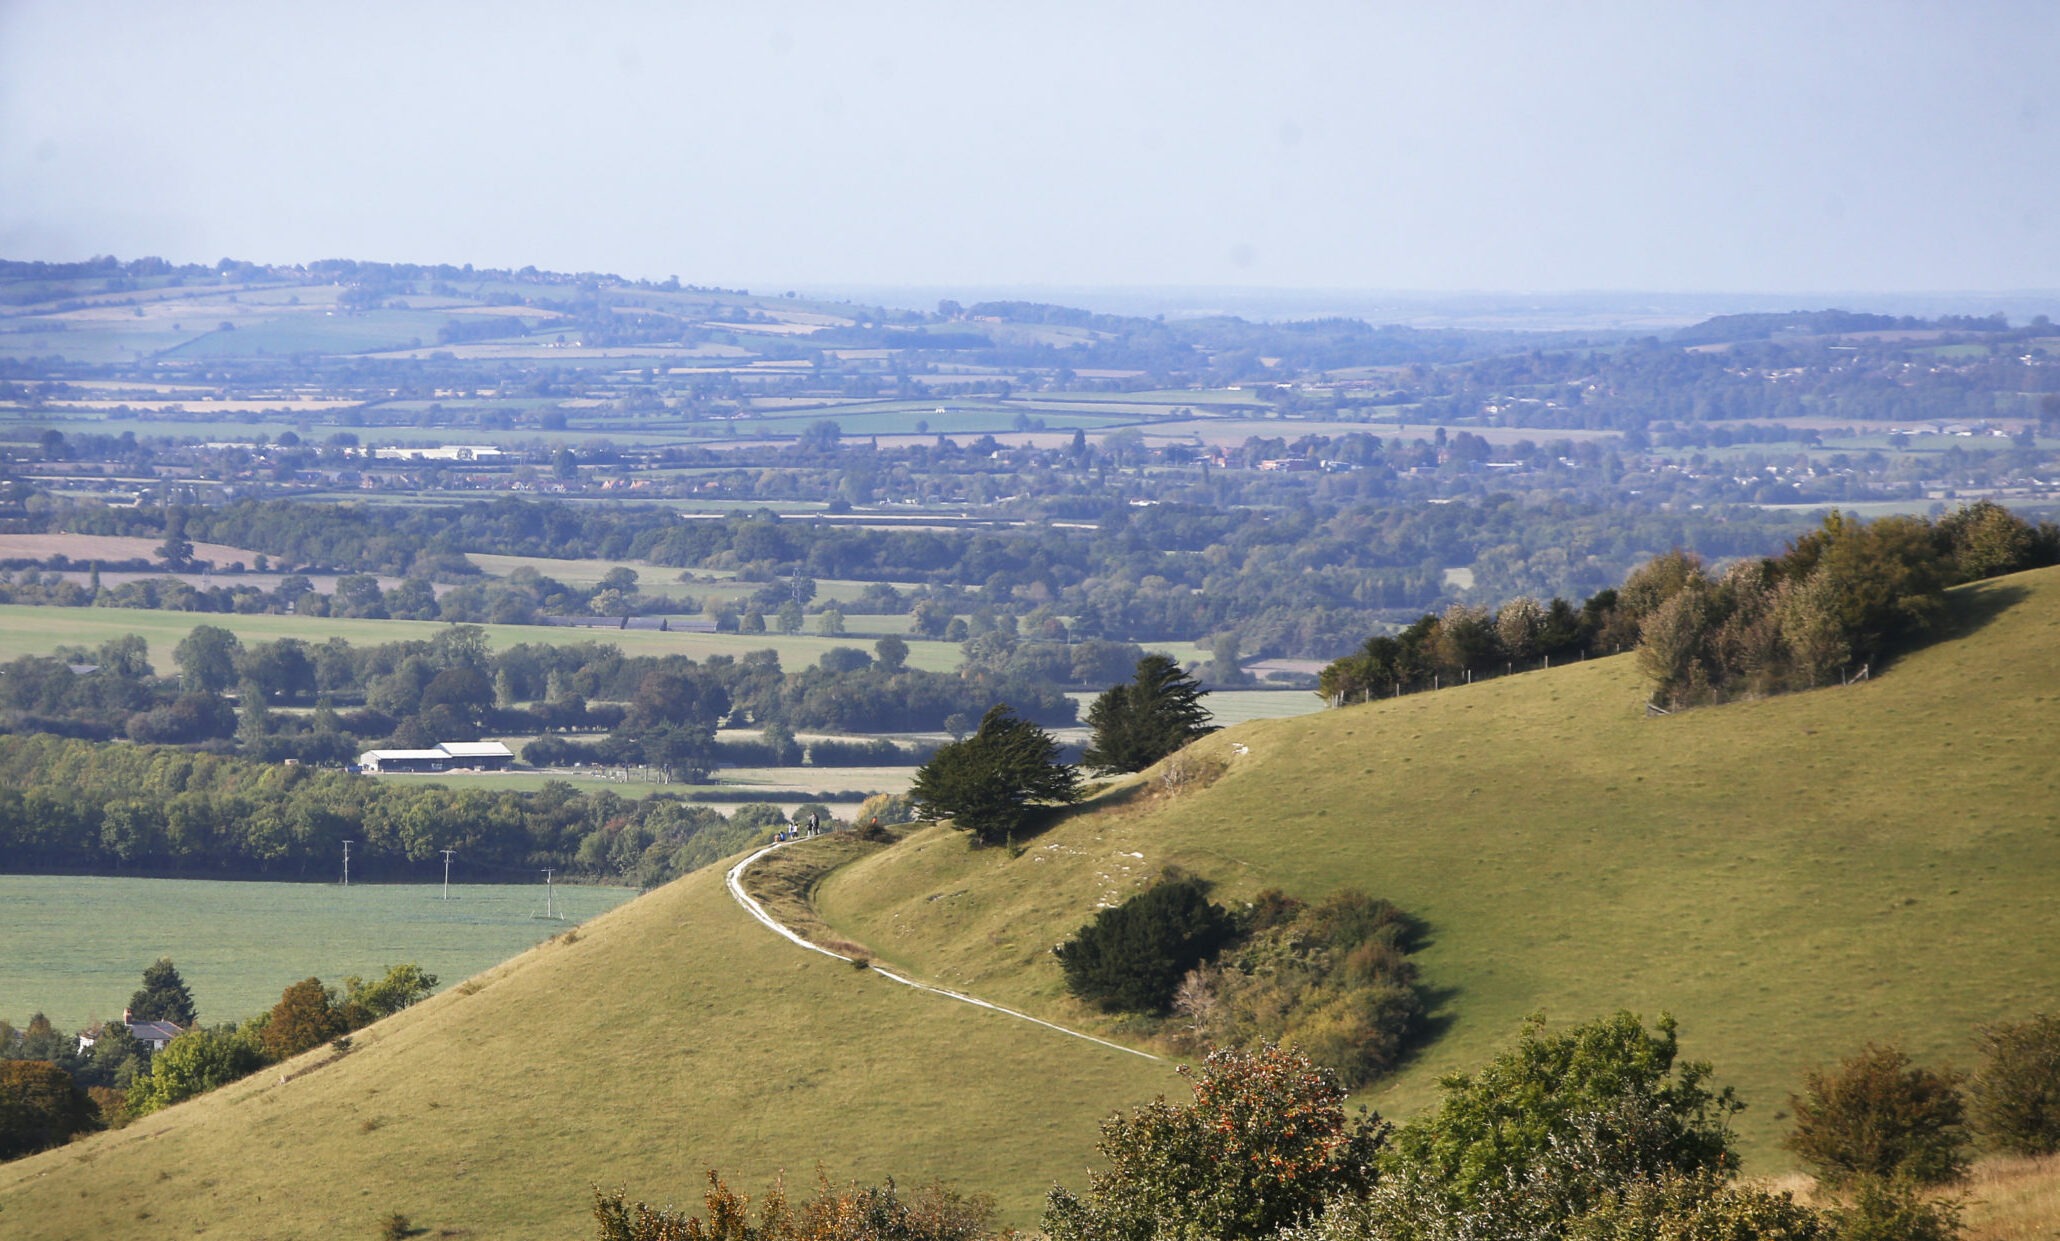 Chiltern Hills, South Oxfordshire District, Vale of White Horse District, Joint Local Plan 2041